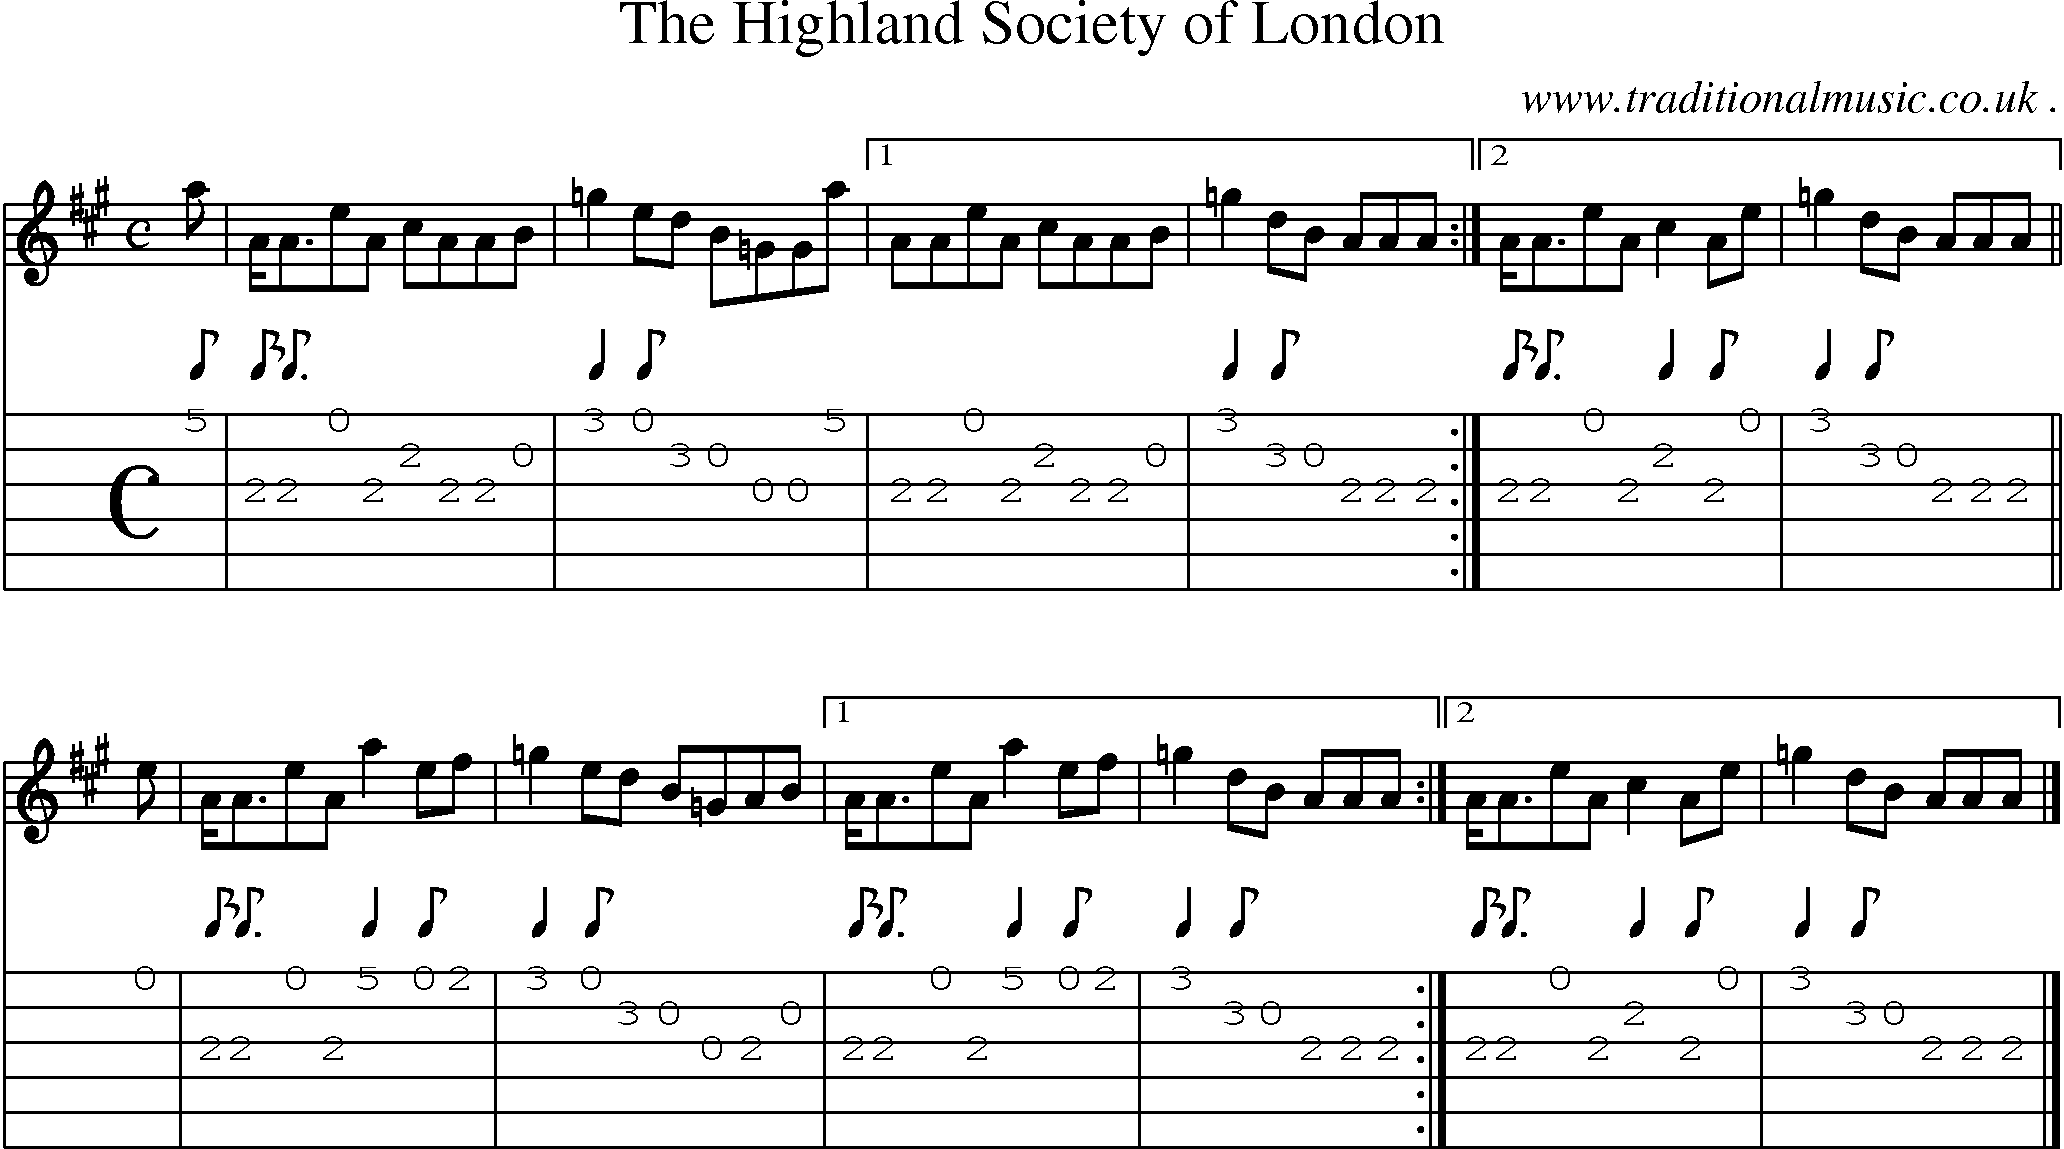 Sheet-music  score, Chords and Guitar Tabs for The Highland Society Of London